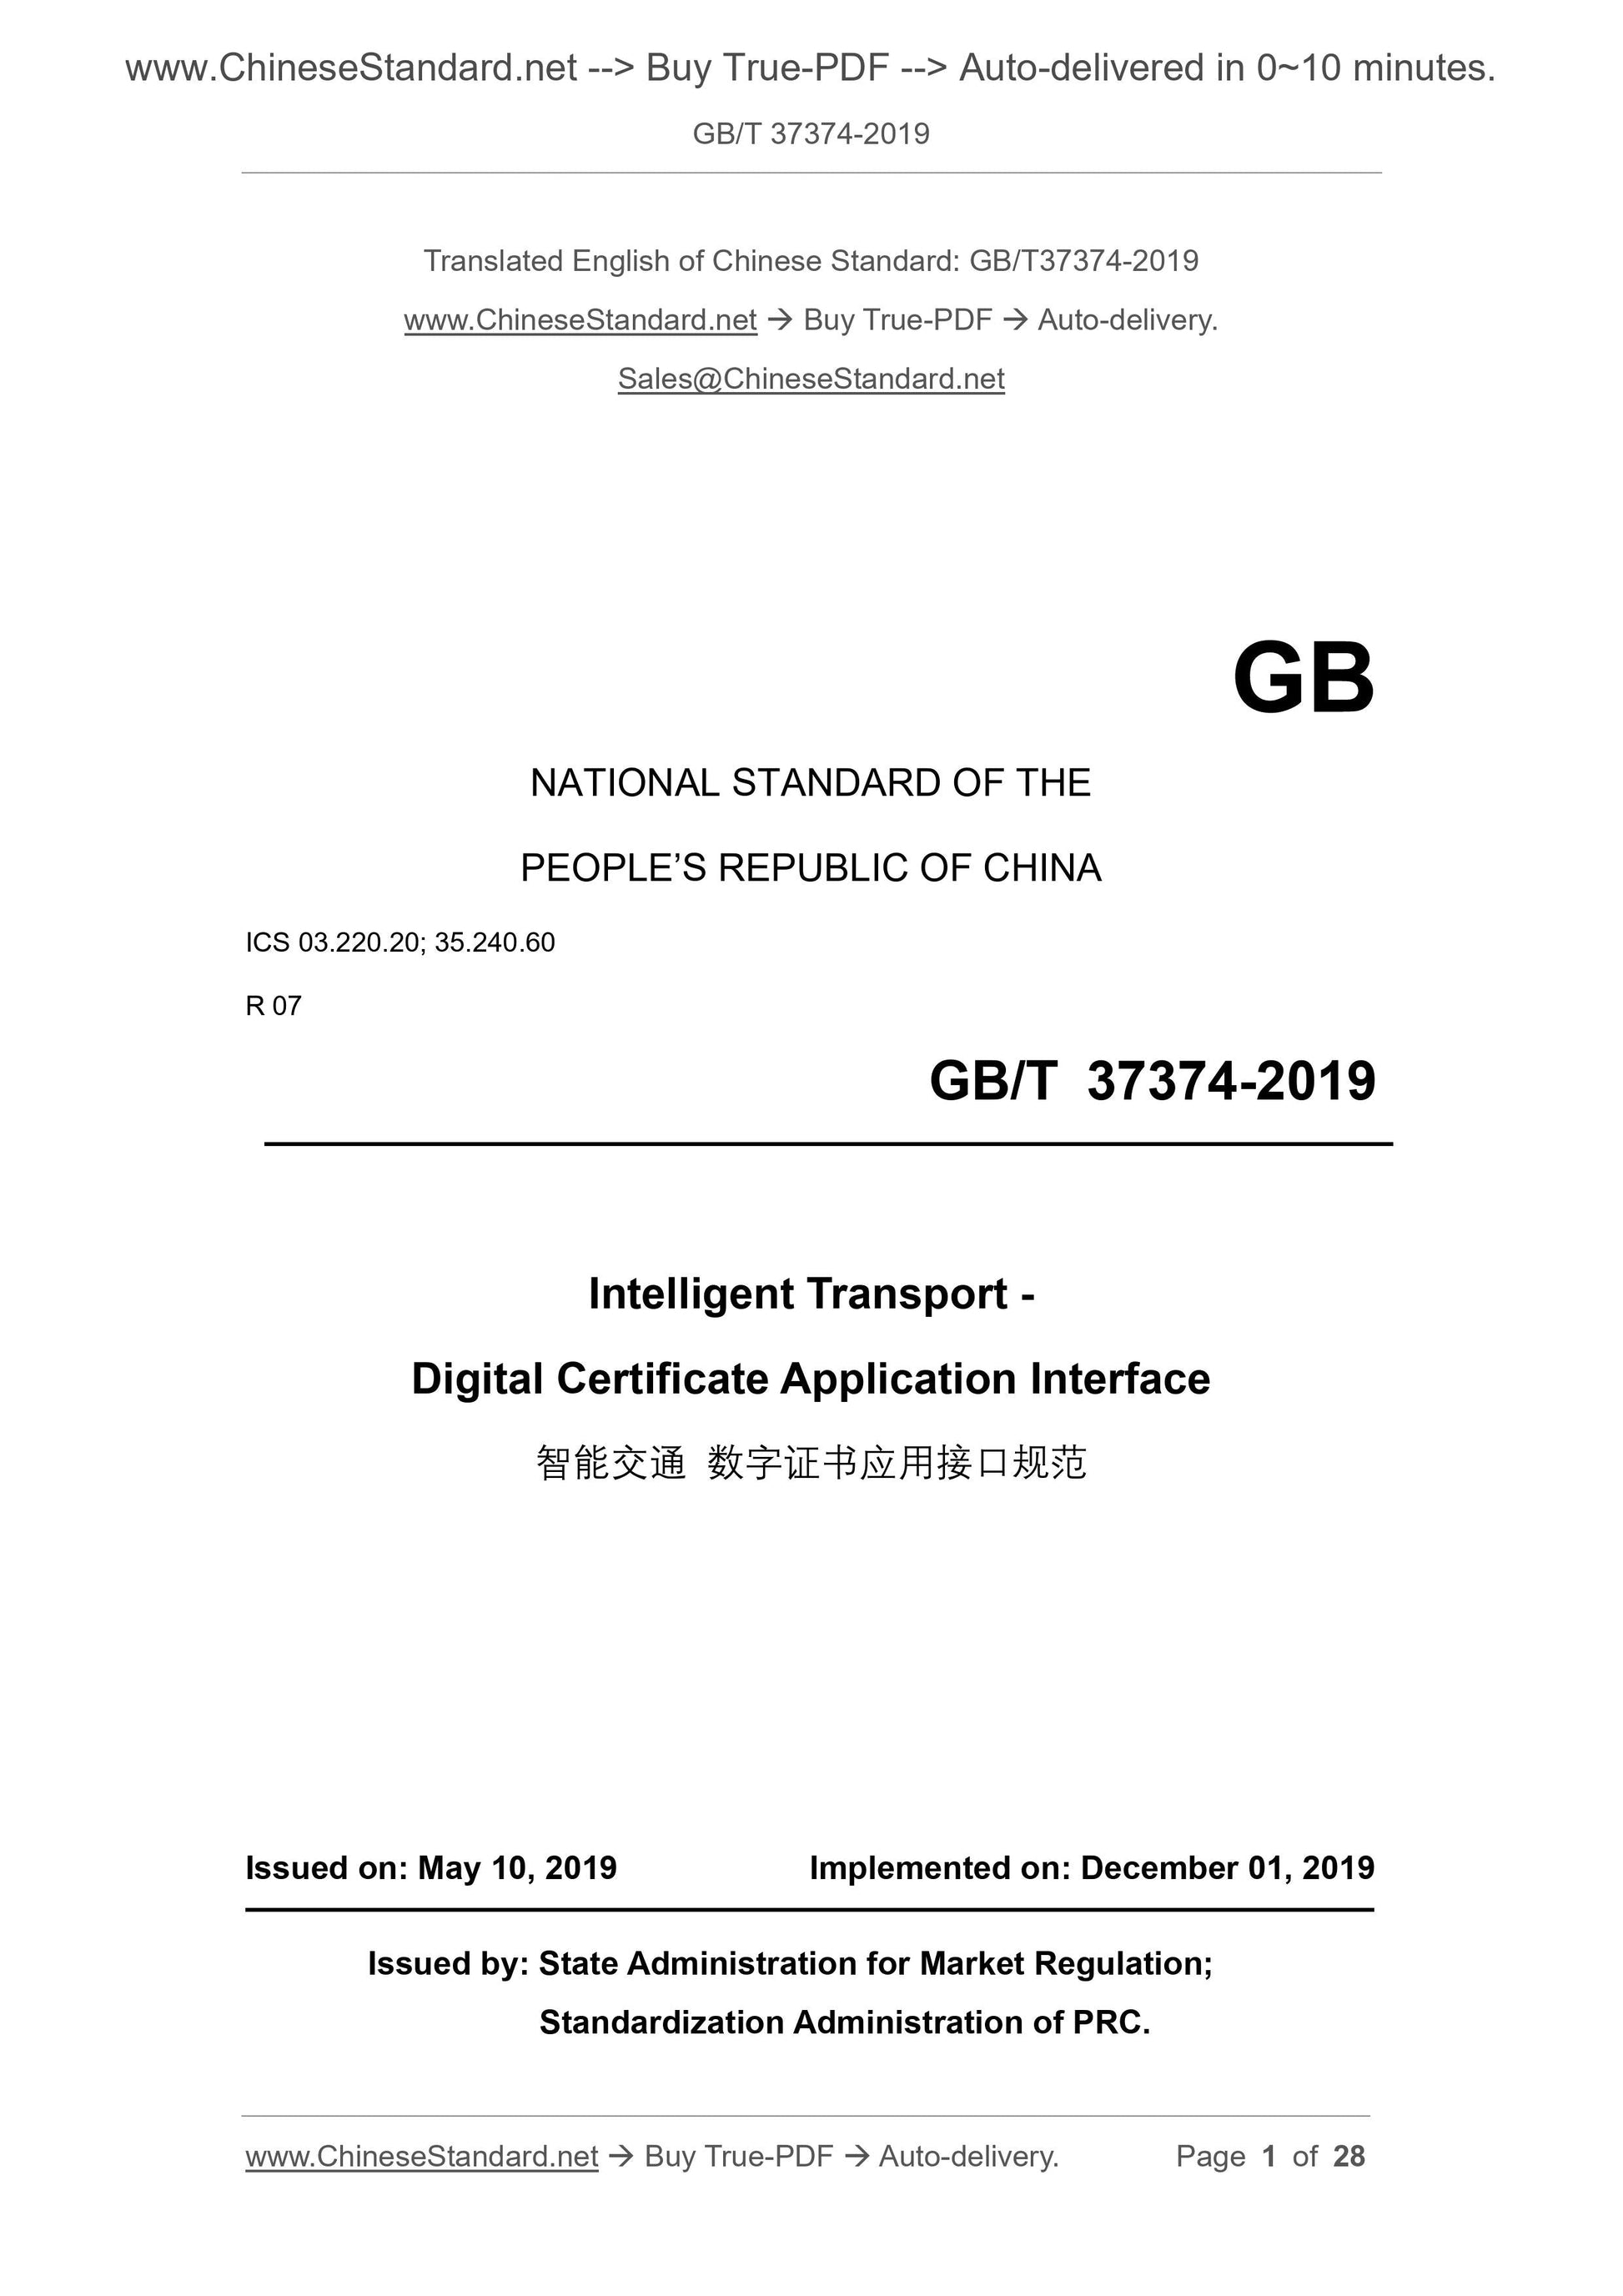 GB/T 37374-2019 Page 1